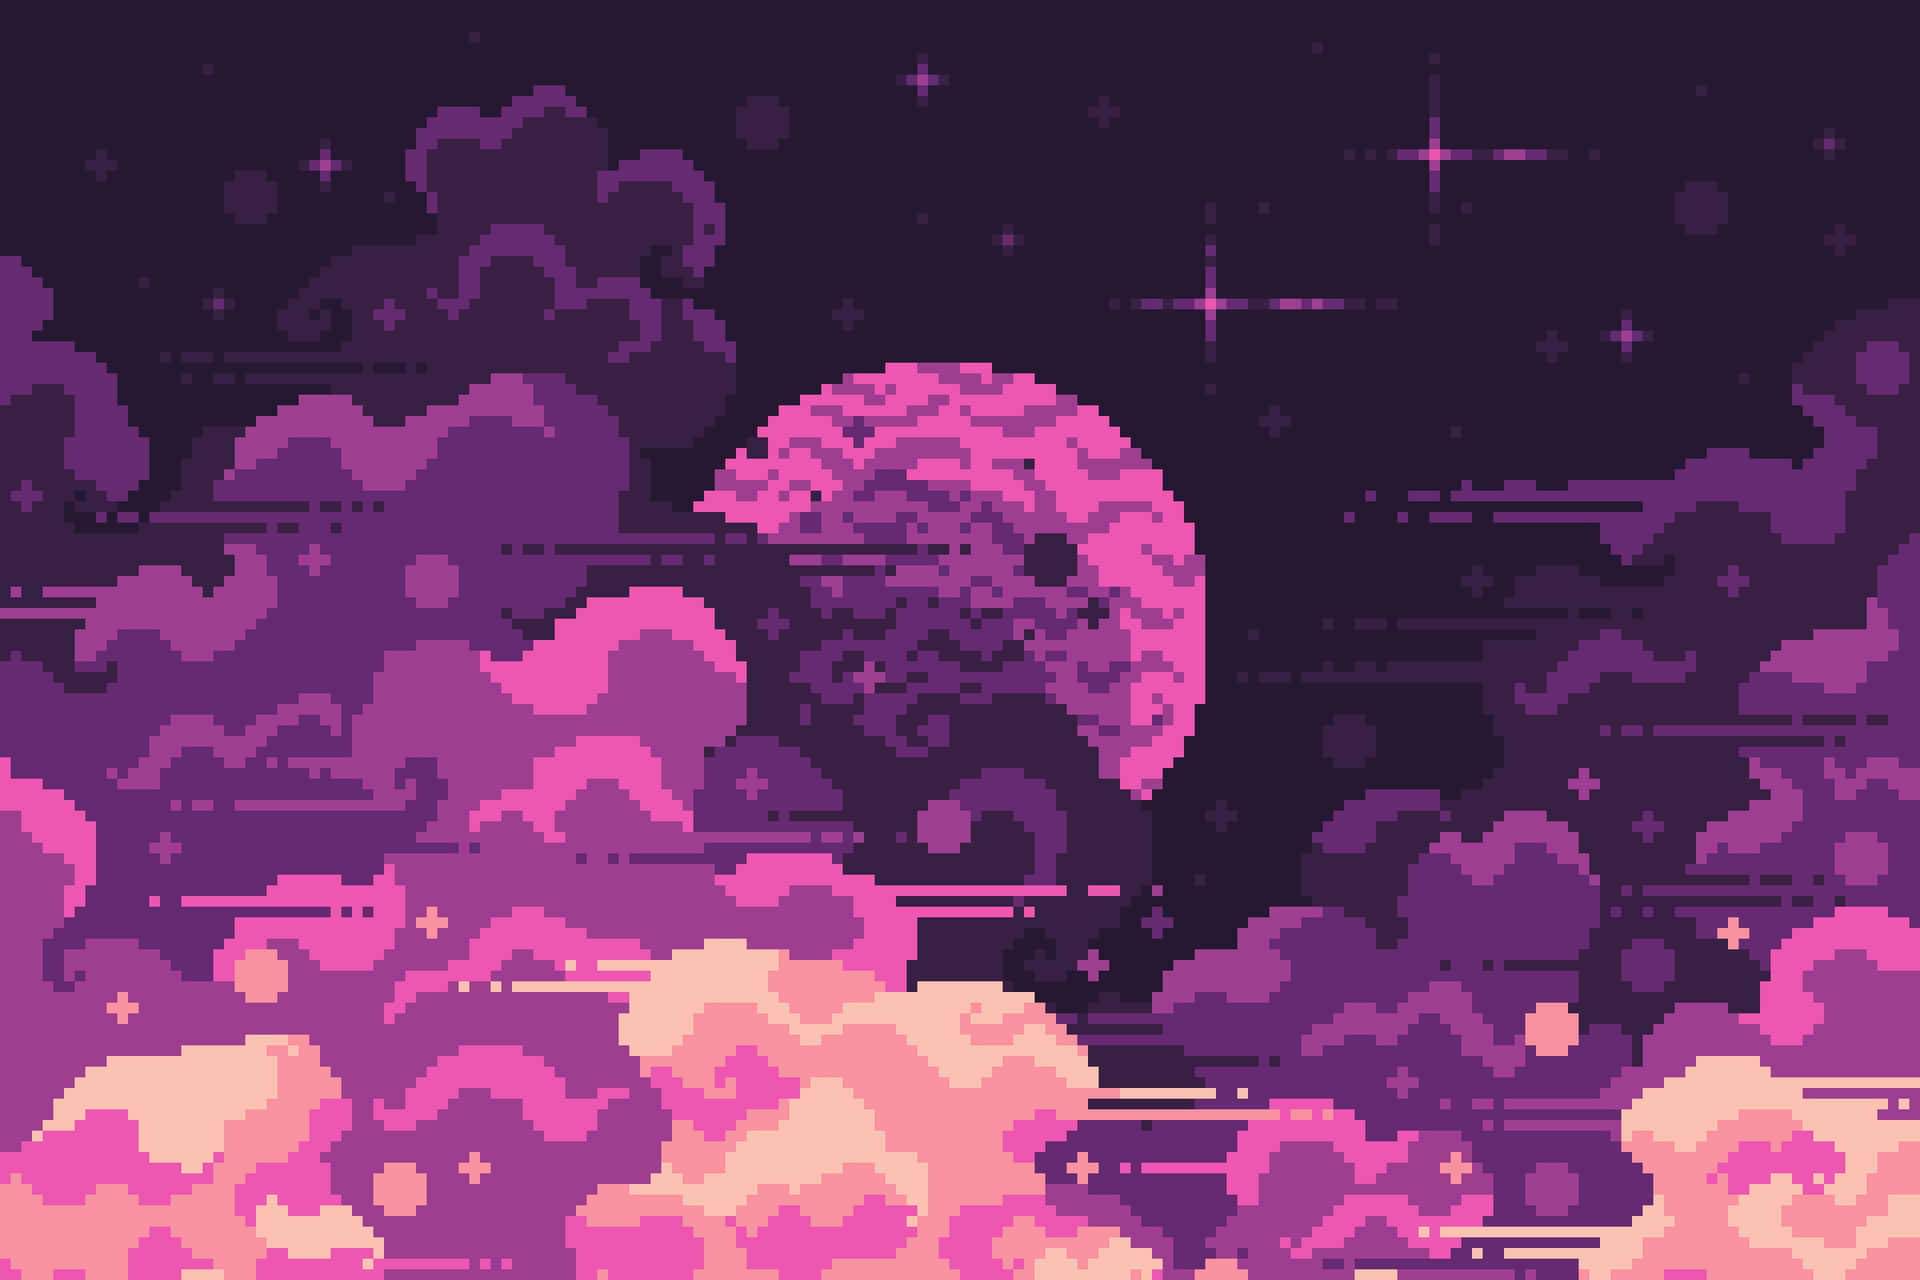 Discover the pixelated wonders of Pixel Landscape Wallpaper